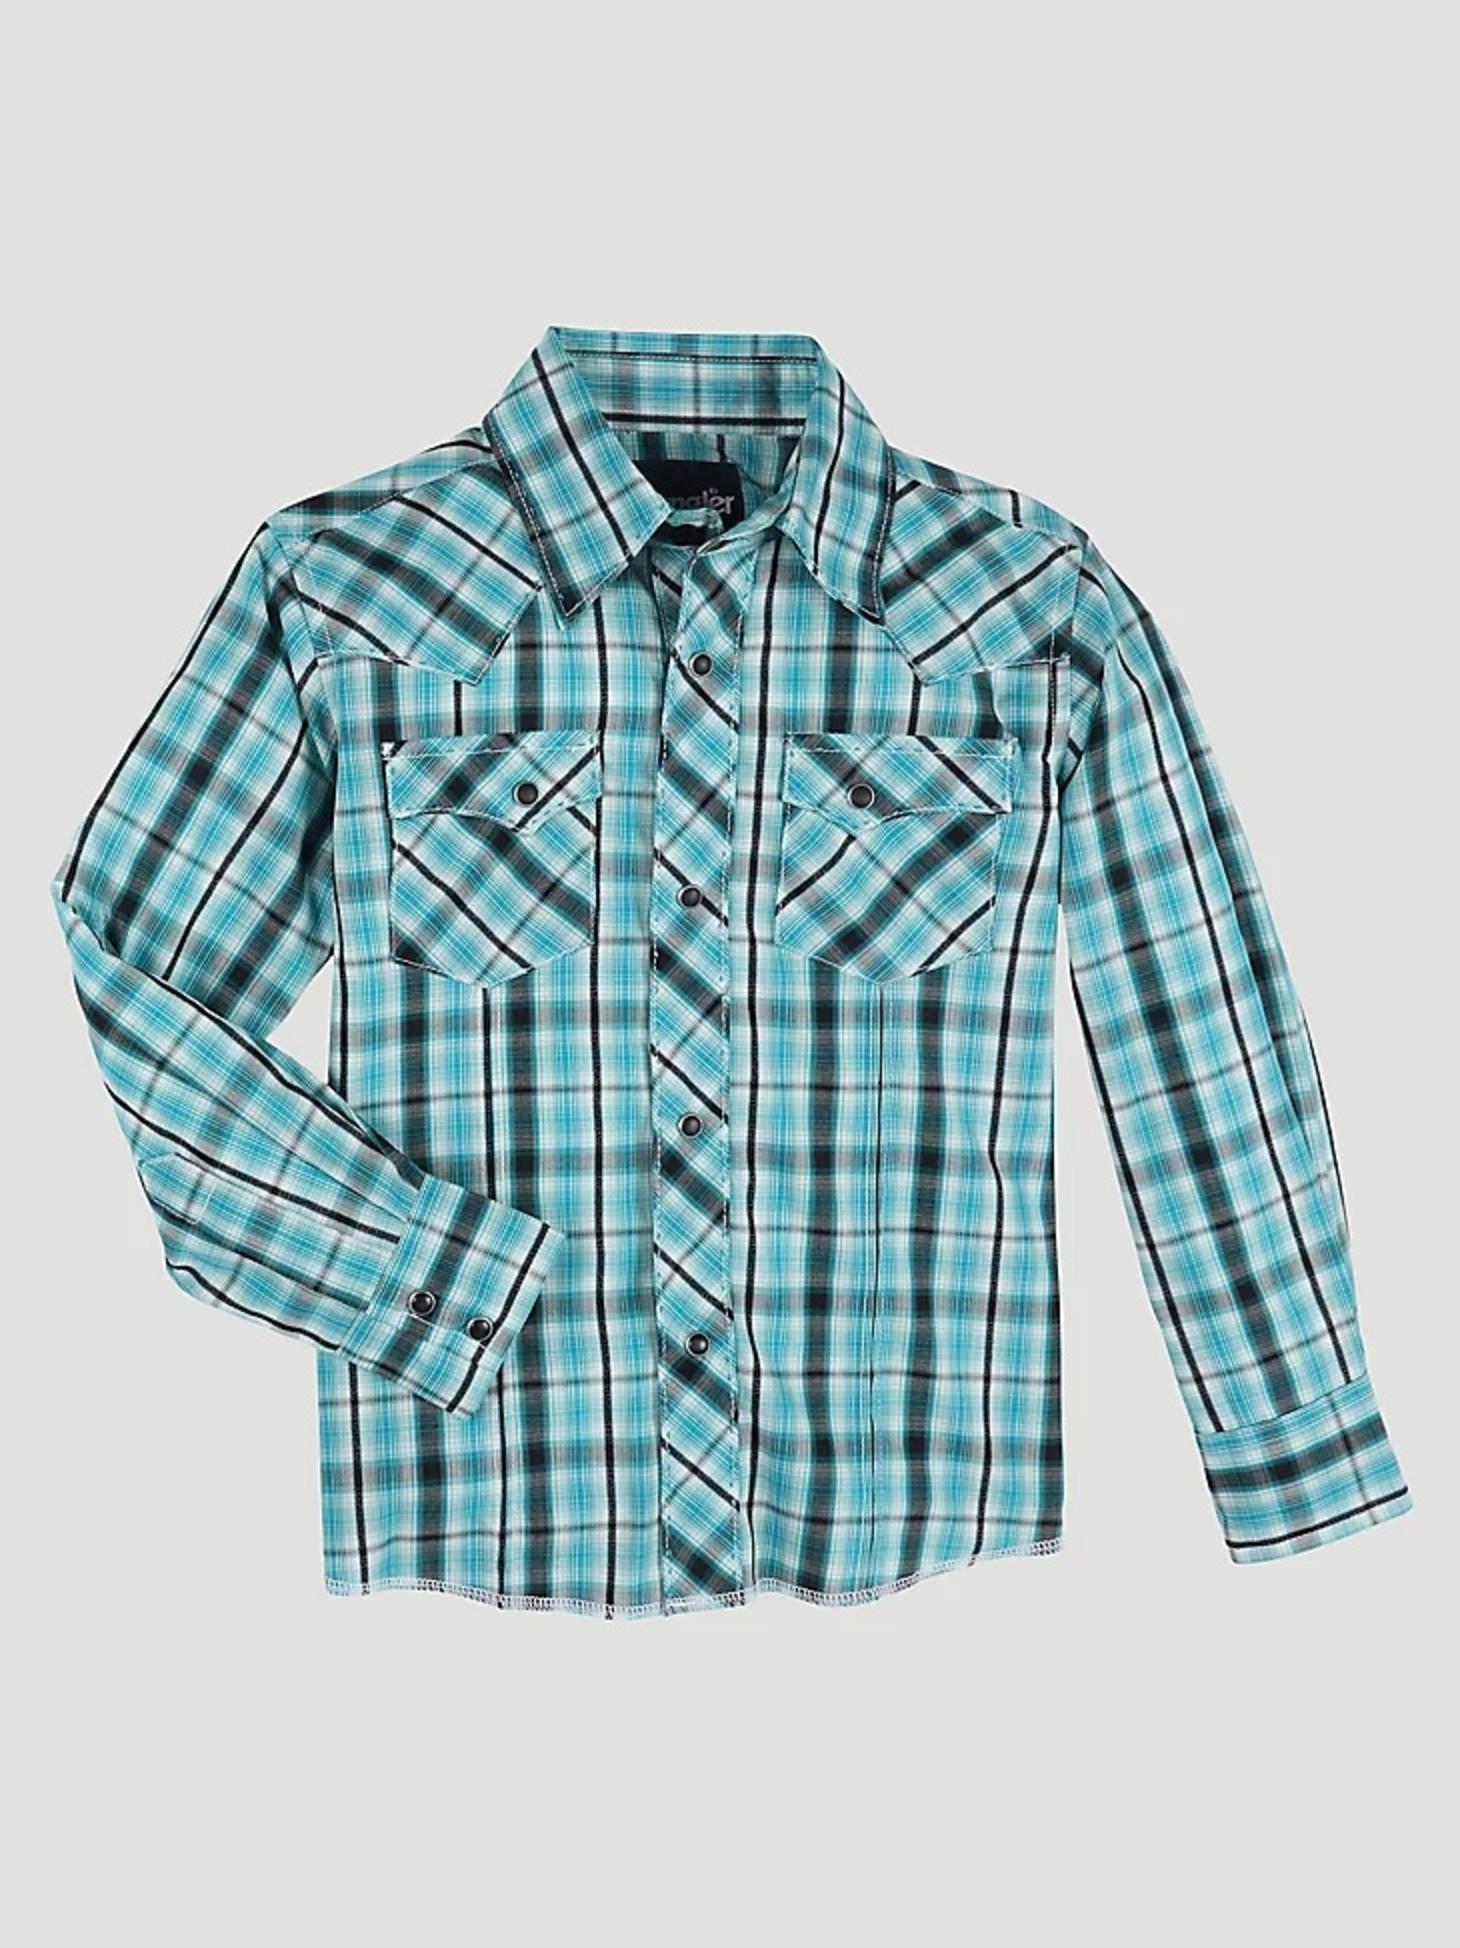 Boy's Long Sleeve Fashion Western Snap Plaid Shirt front view